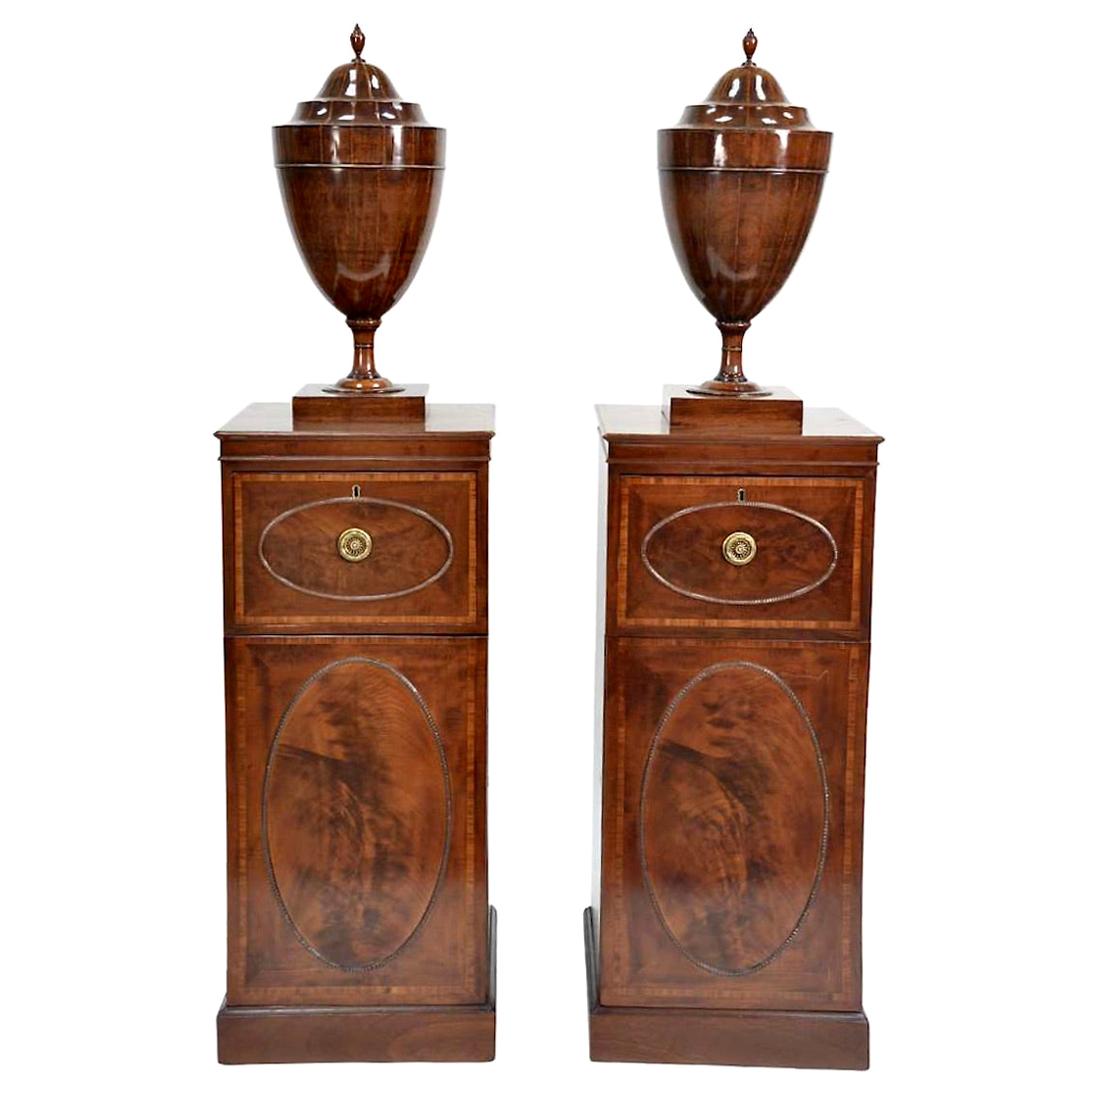 Pair of 19th Century George IV Mahogany Humidor Cabinets with Cutlery Urns